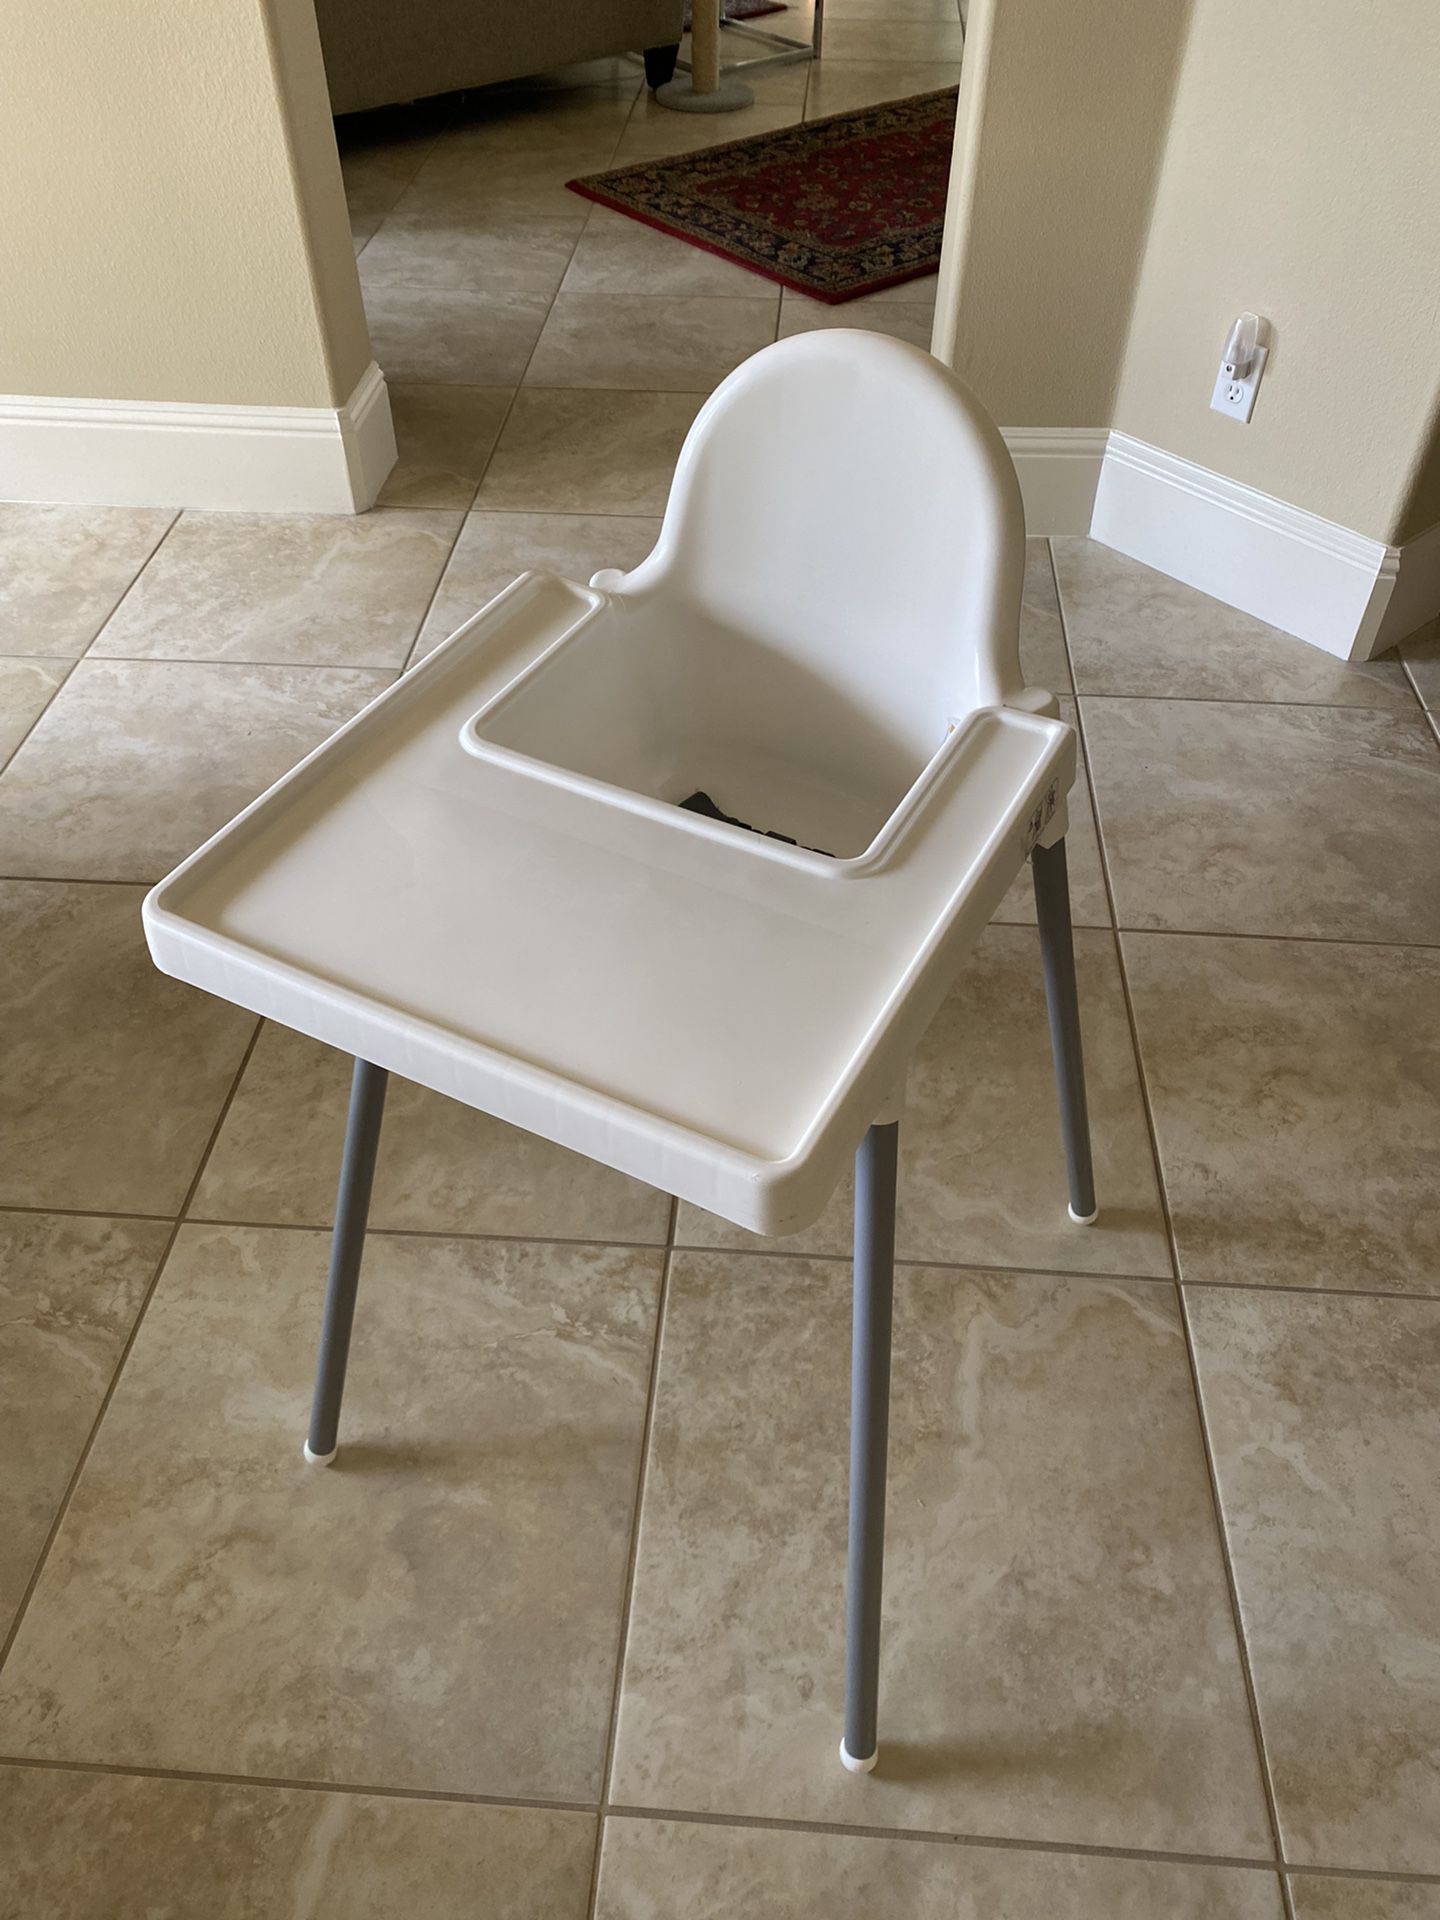 Grammy’s Mint IKEA High Chair Highchair (barely Used) Baby Toddler